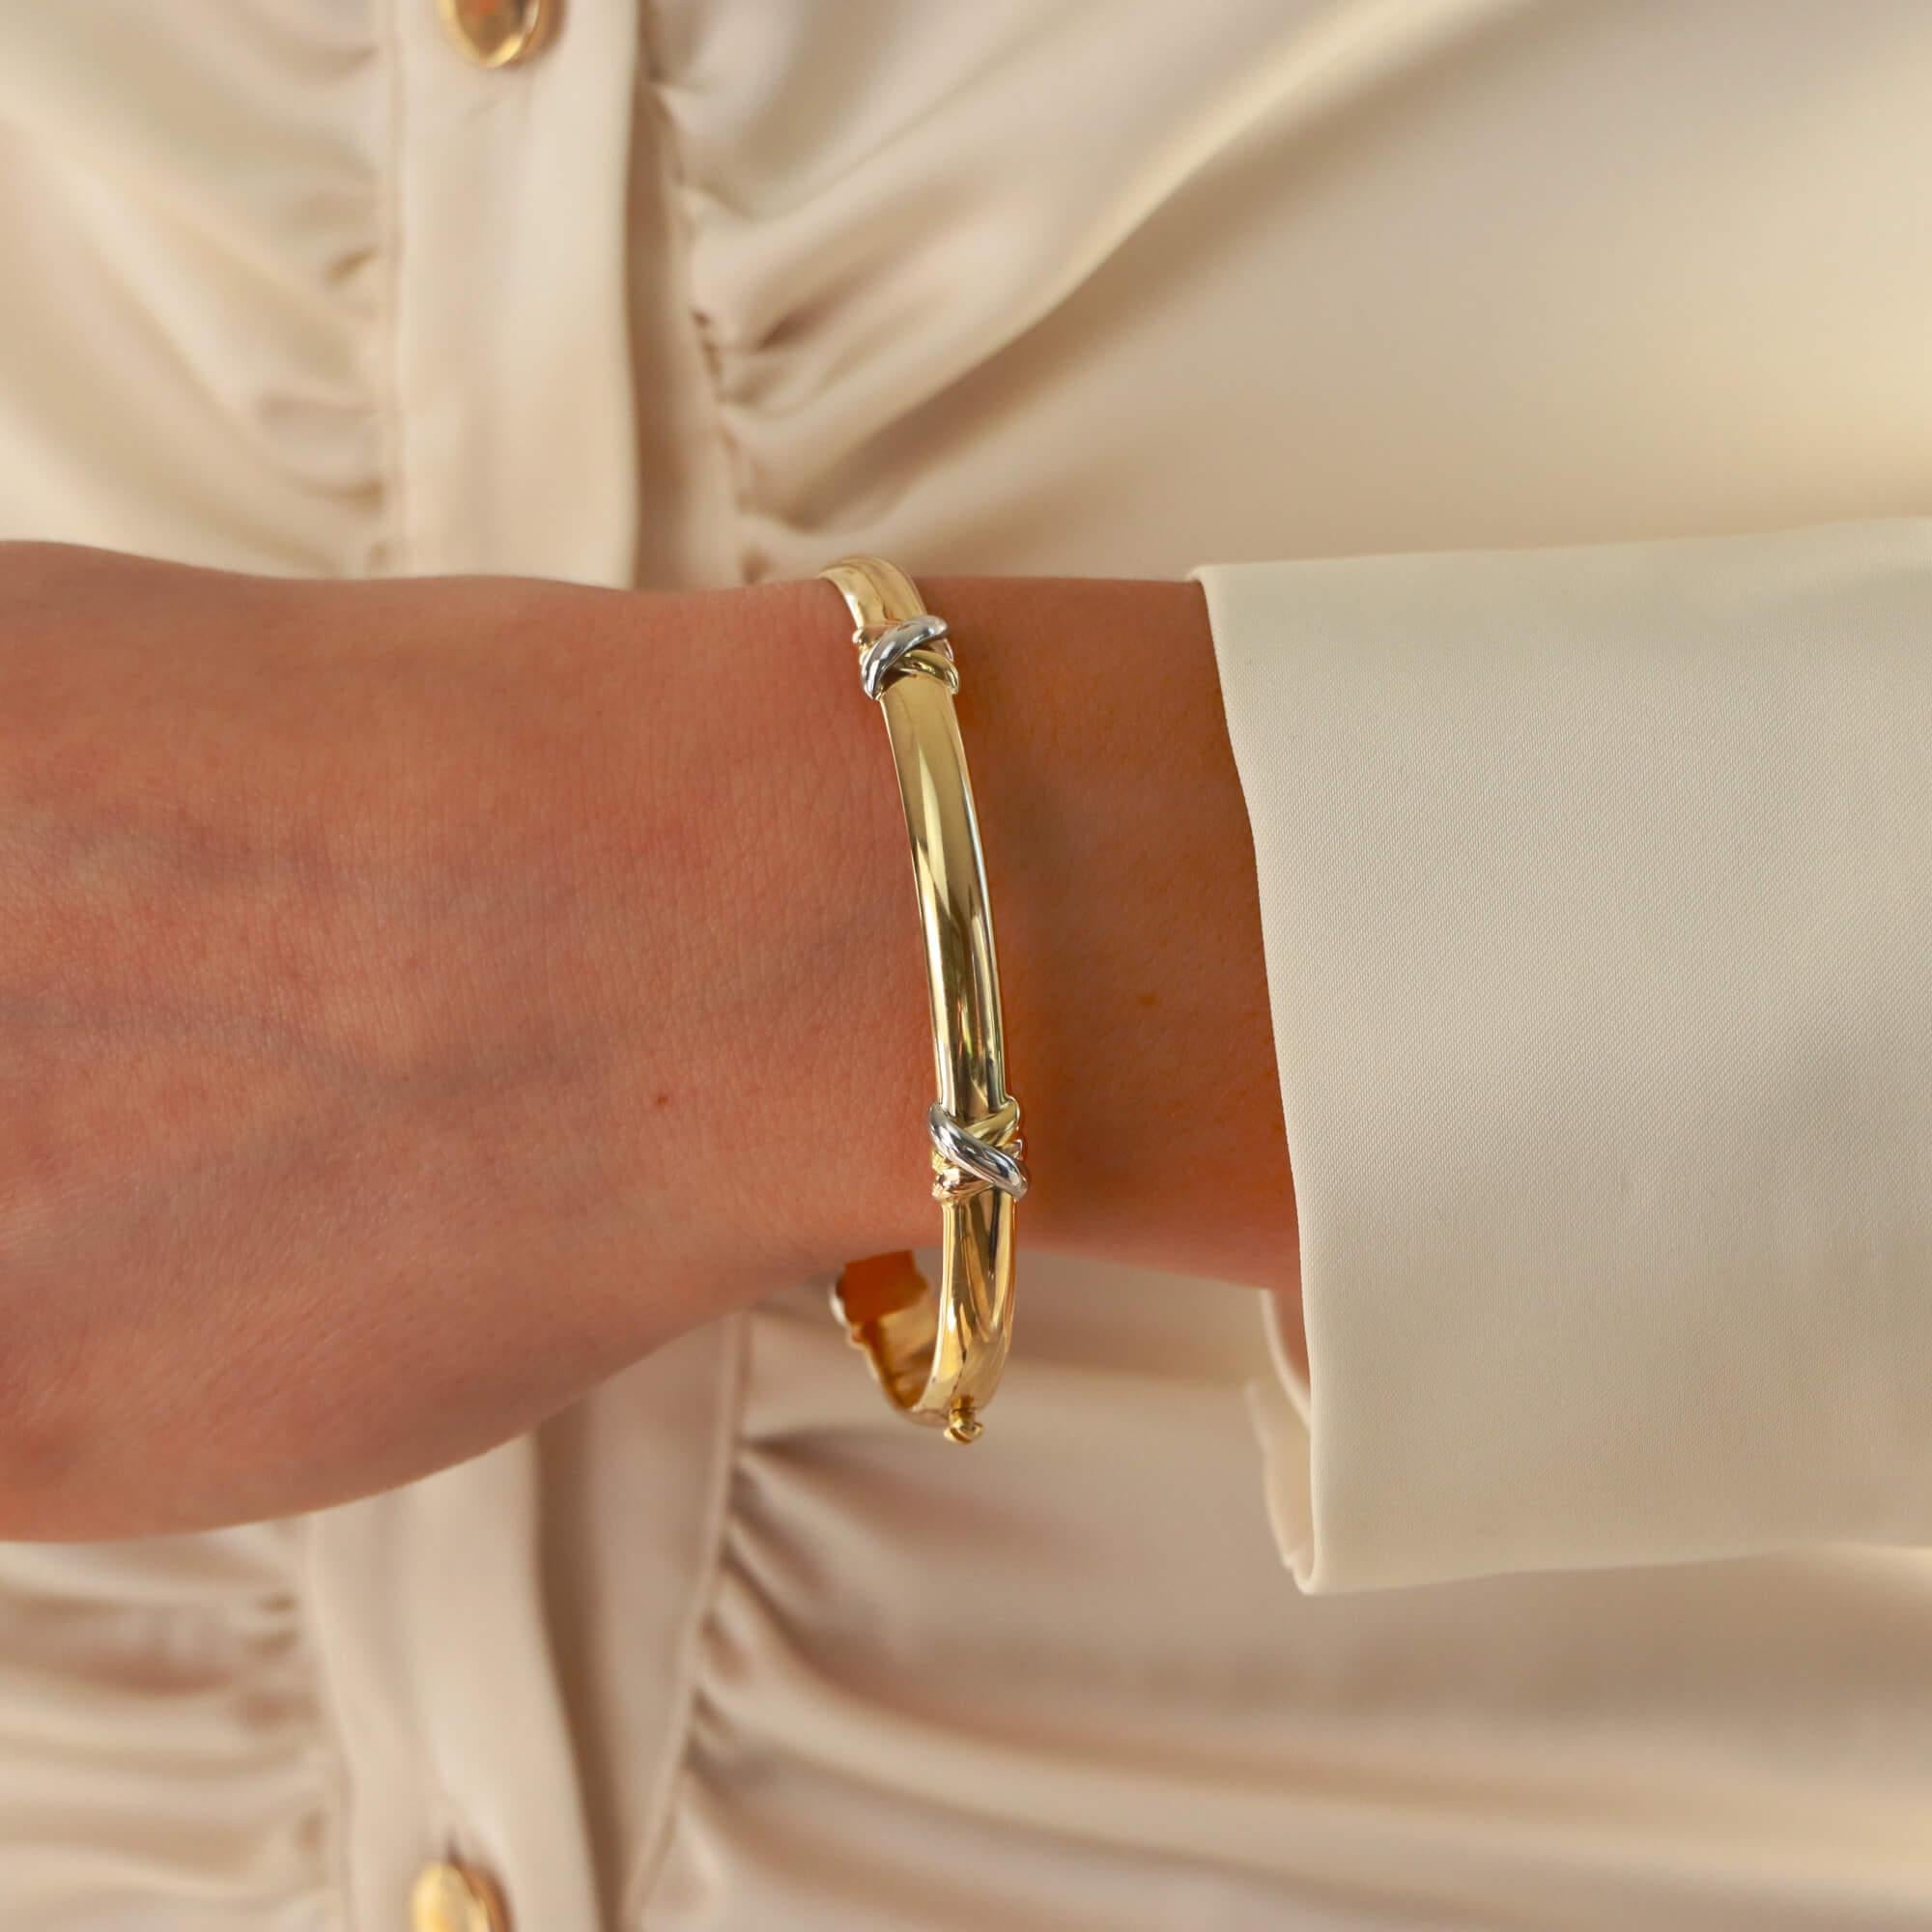 A unique Cartier ‘Trinity Kiss’ screw bangle set in 18k yellow, rose and white gold.

Baring resemblance to the iconic Cartier Love bangle, this piece shares inspiration. The bangle is composed of a solid 5.5 millimetre yellow gold bangle set with